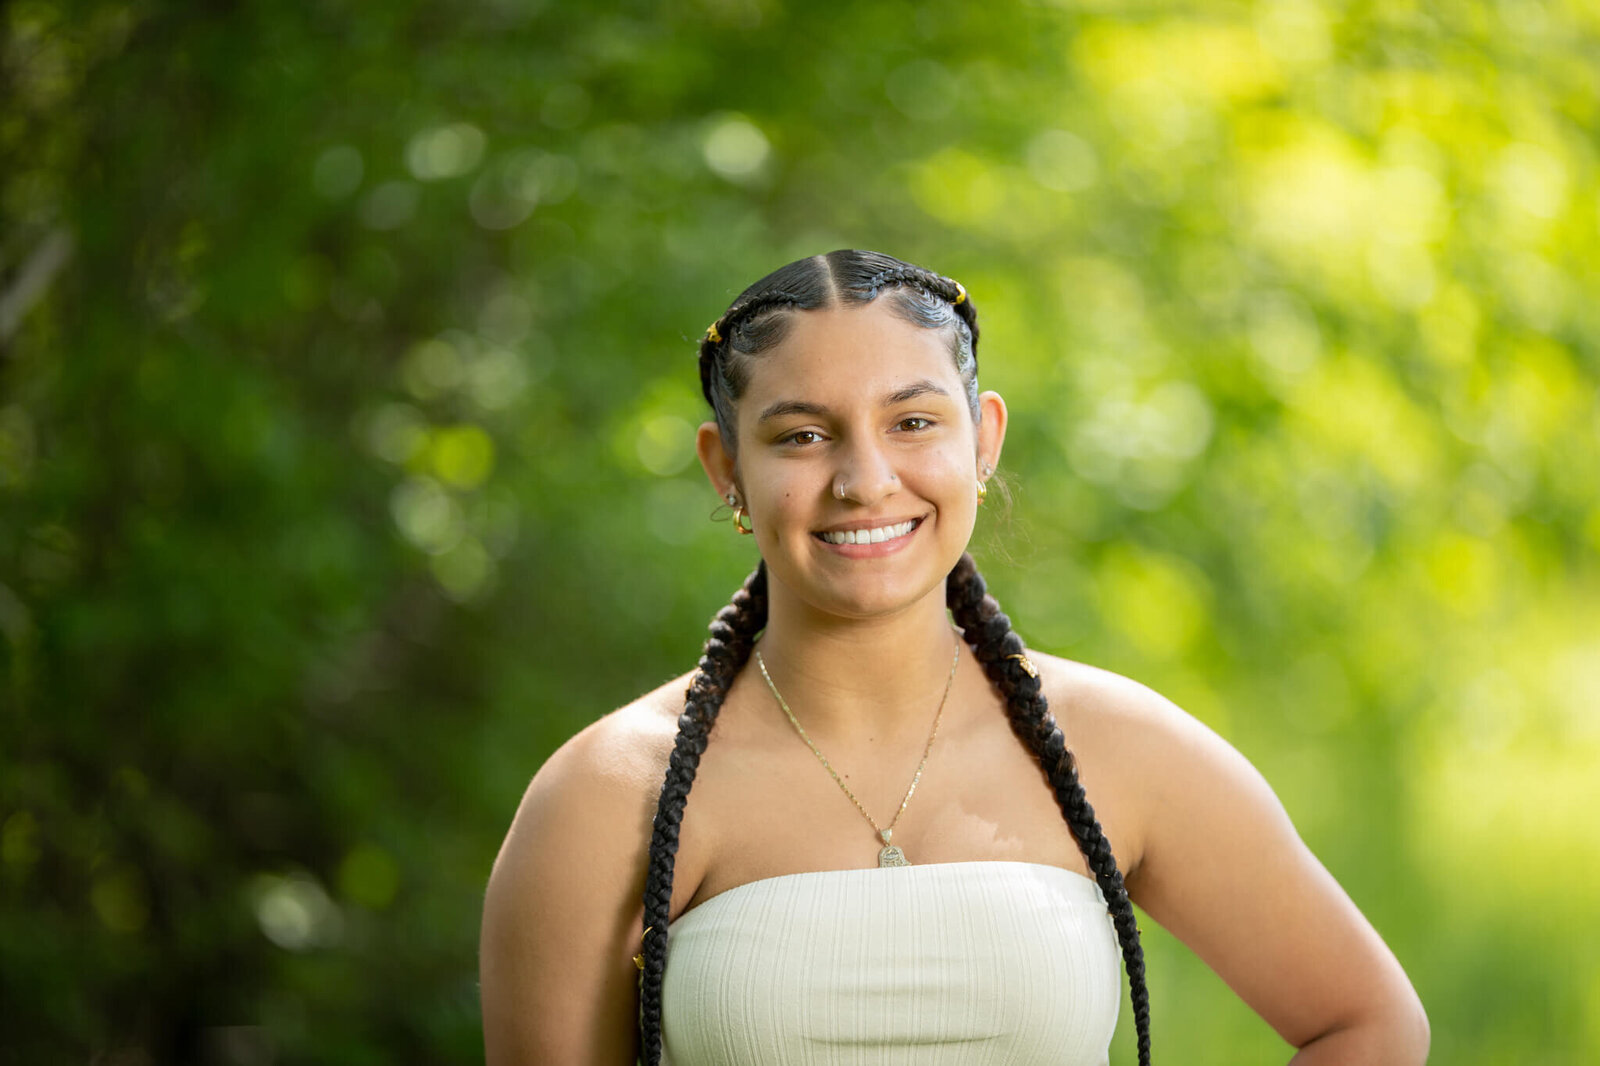 High school senior portrait photography in Clinton MA  of female in a white top smiling at the camera with a green and yellow background